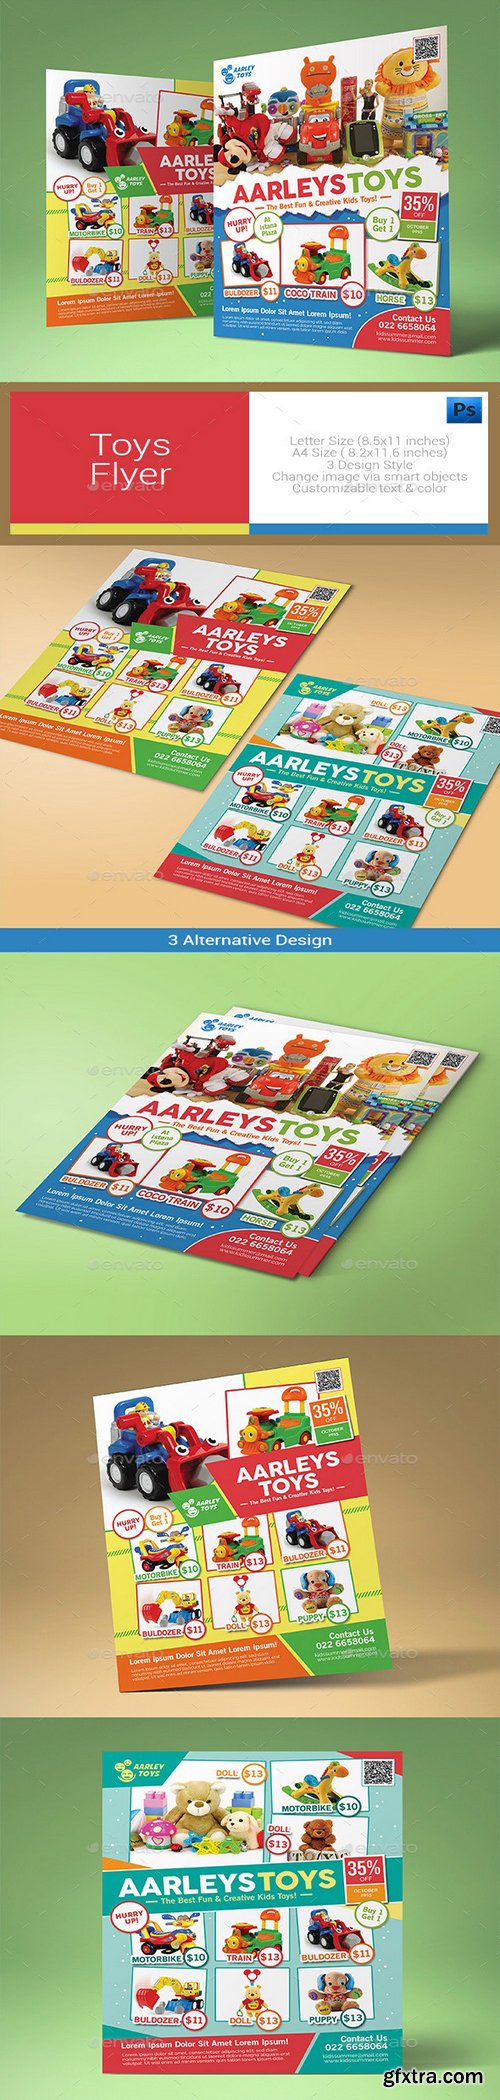 Graphicriver - Toys Flyer 10547600